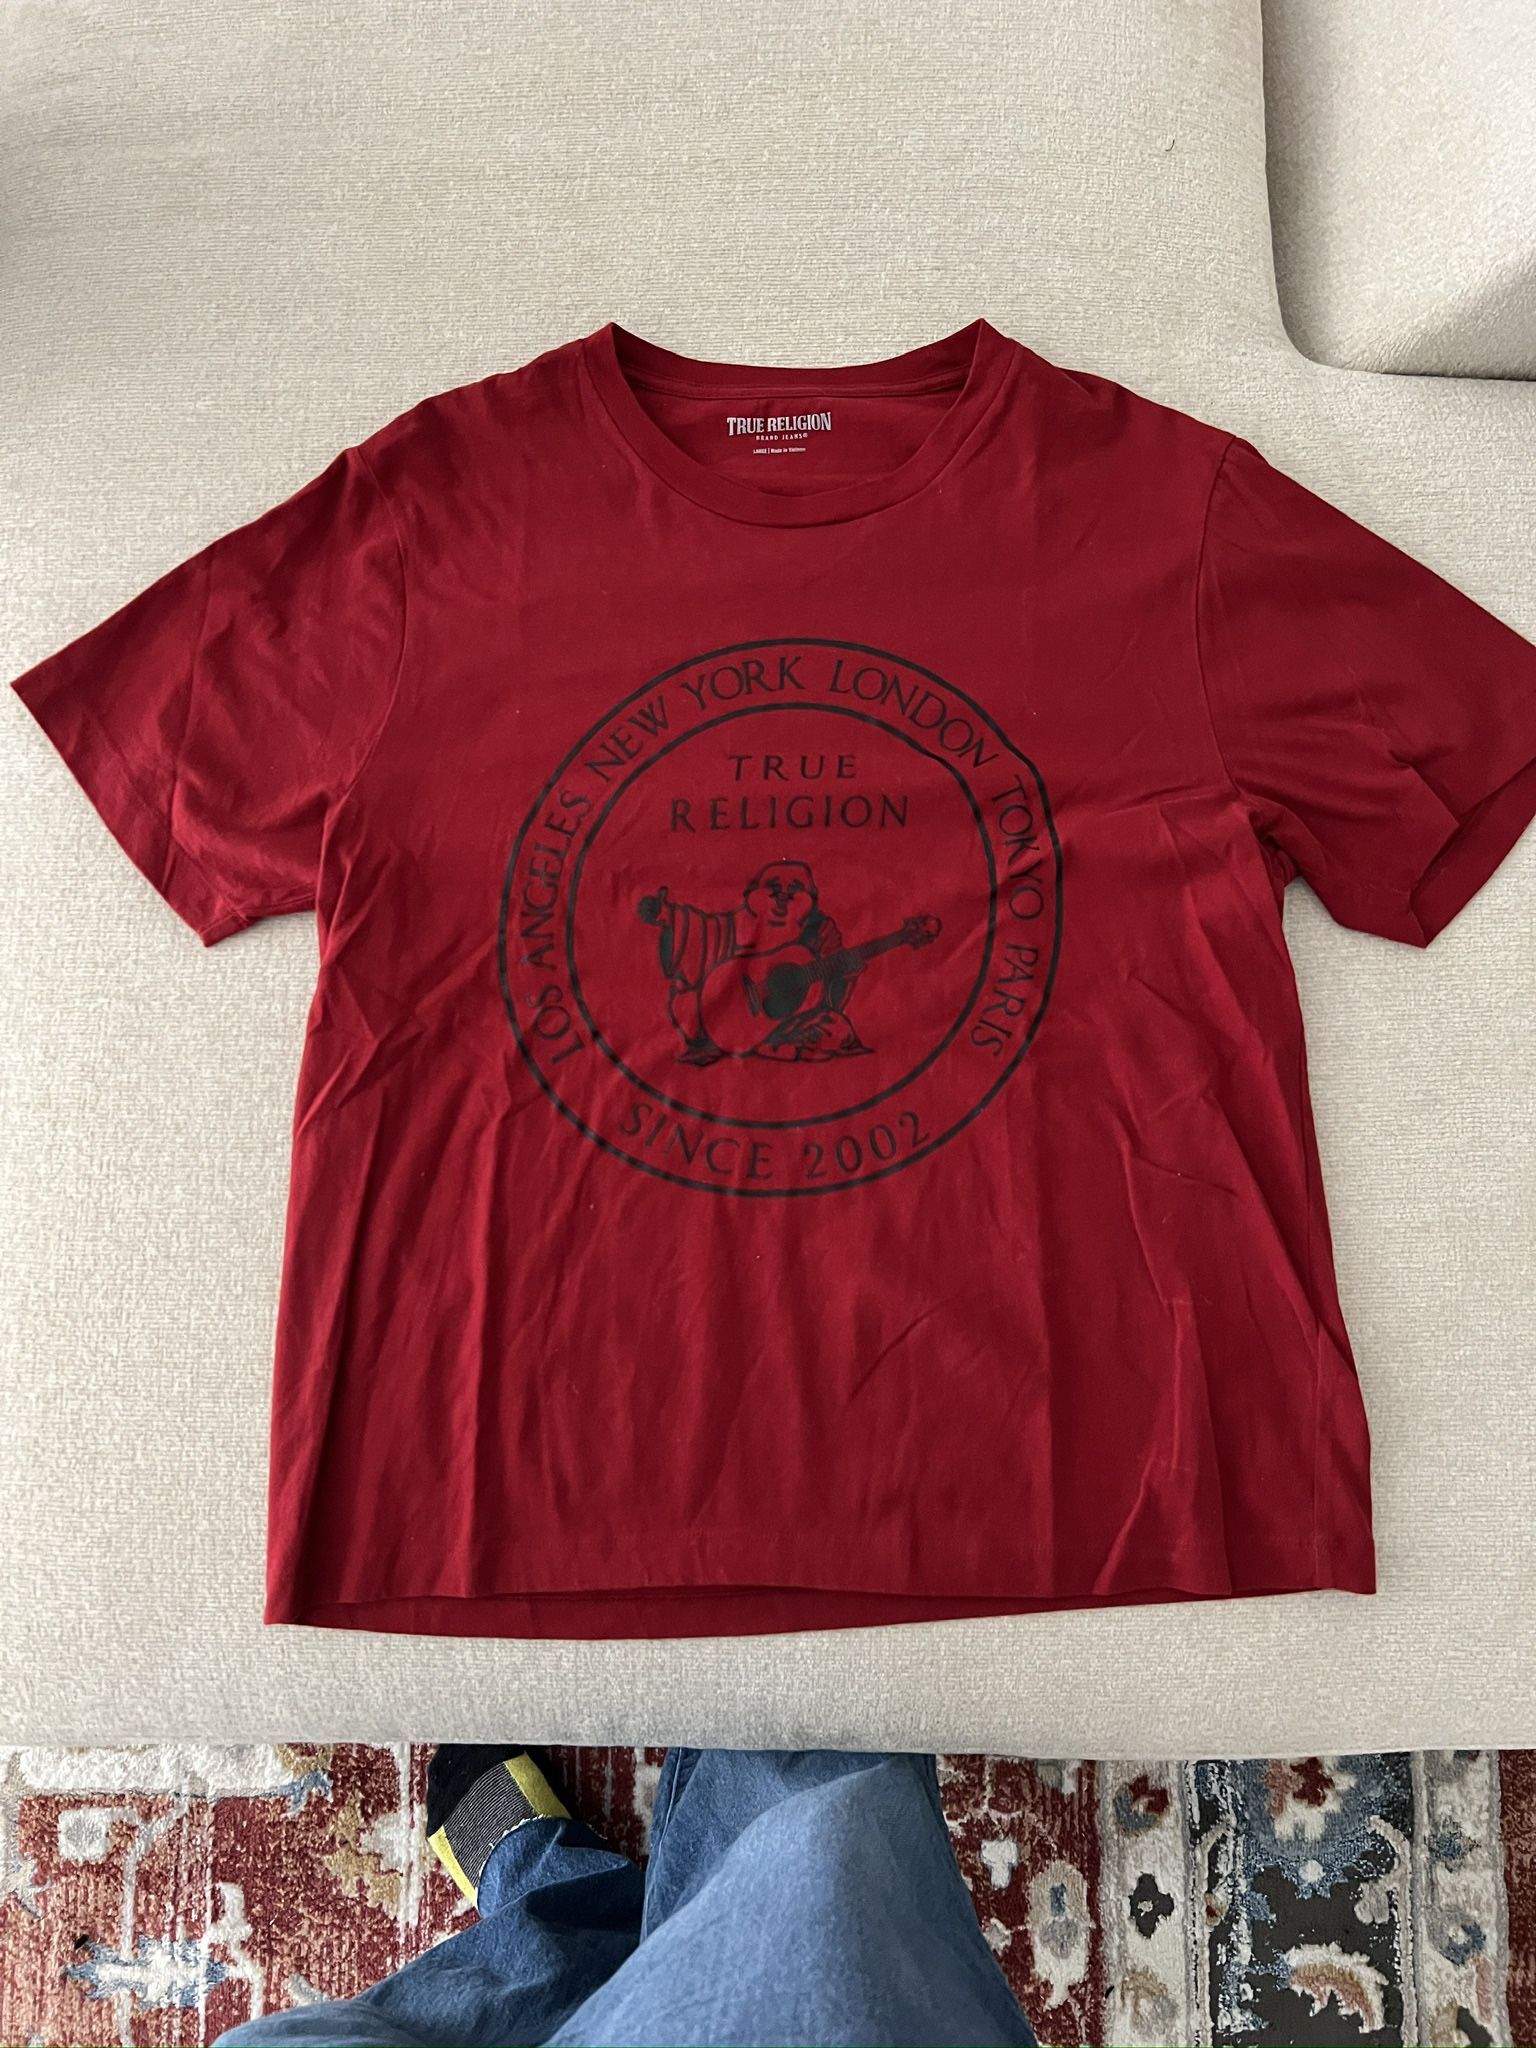 true religion red shirt size large